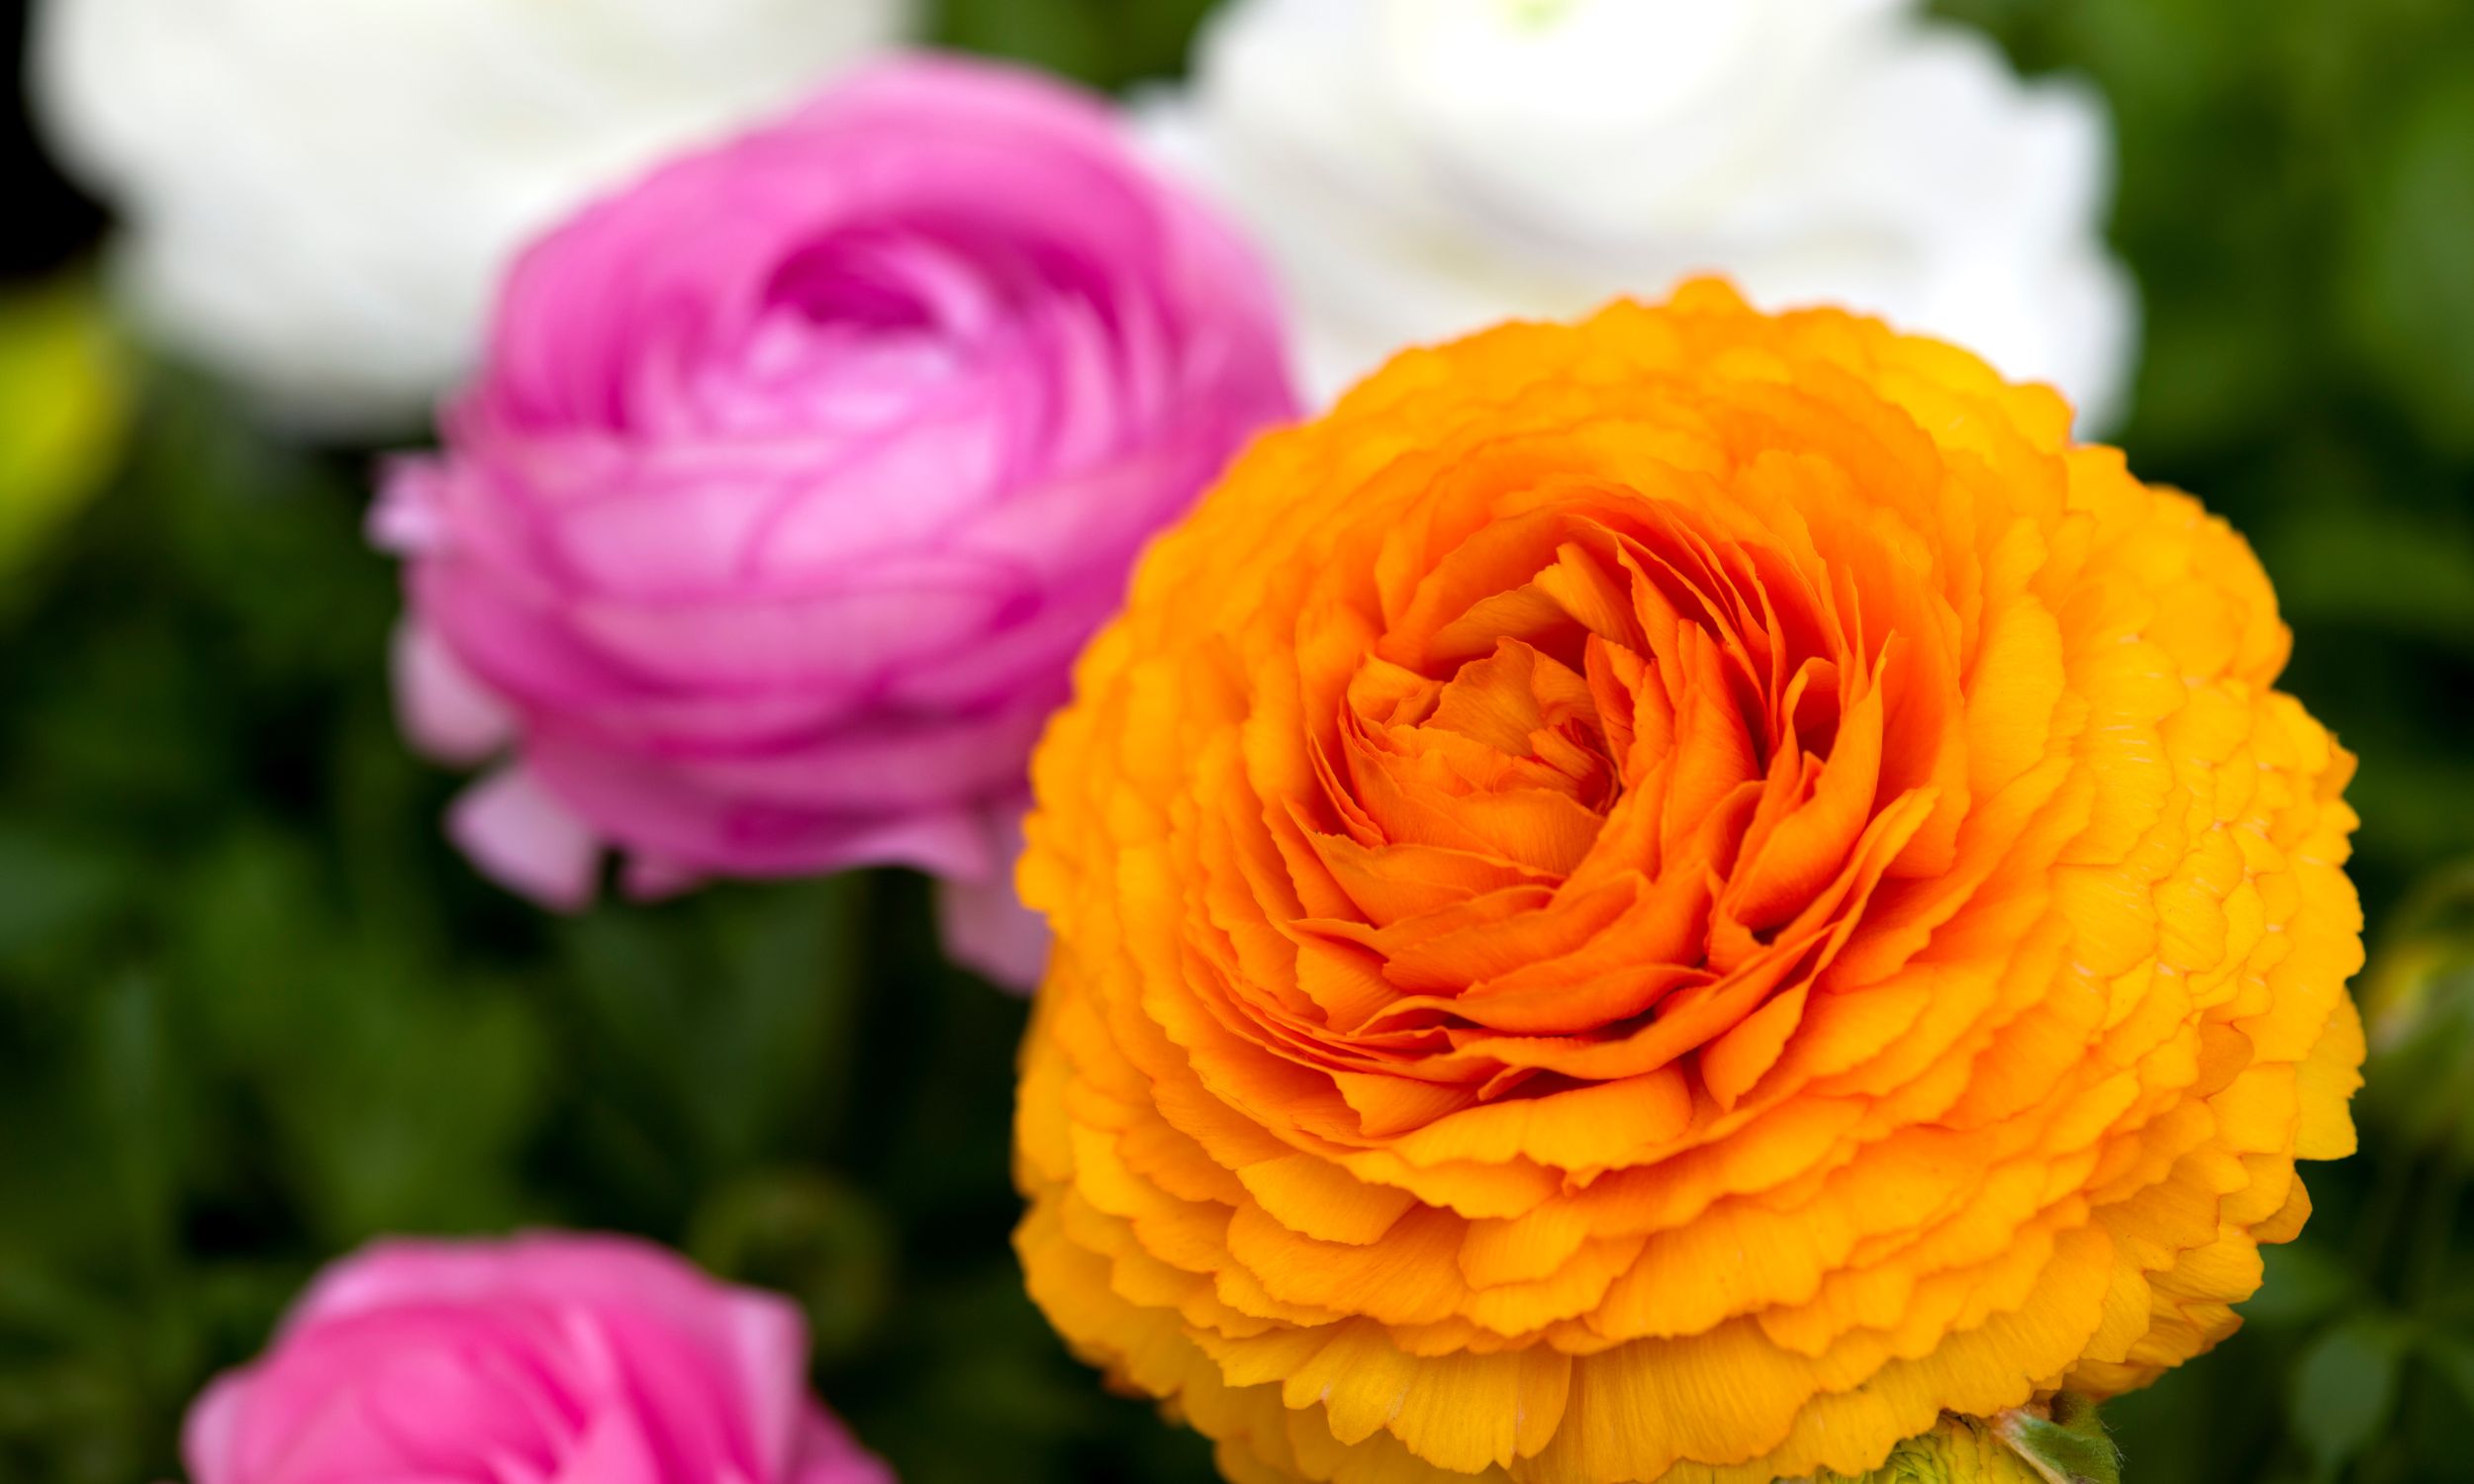 Planting Ranunculus | Where, When, How